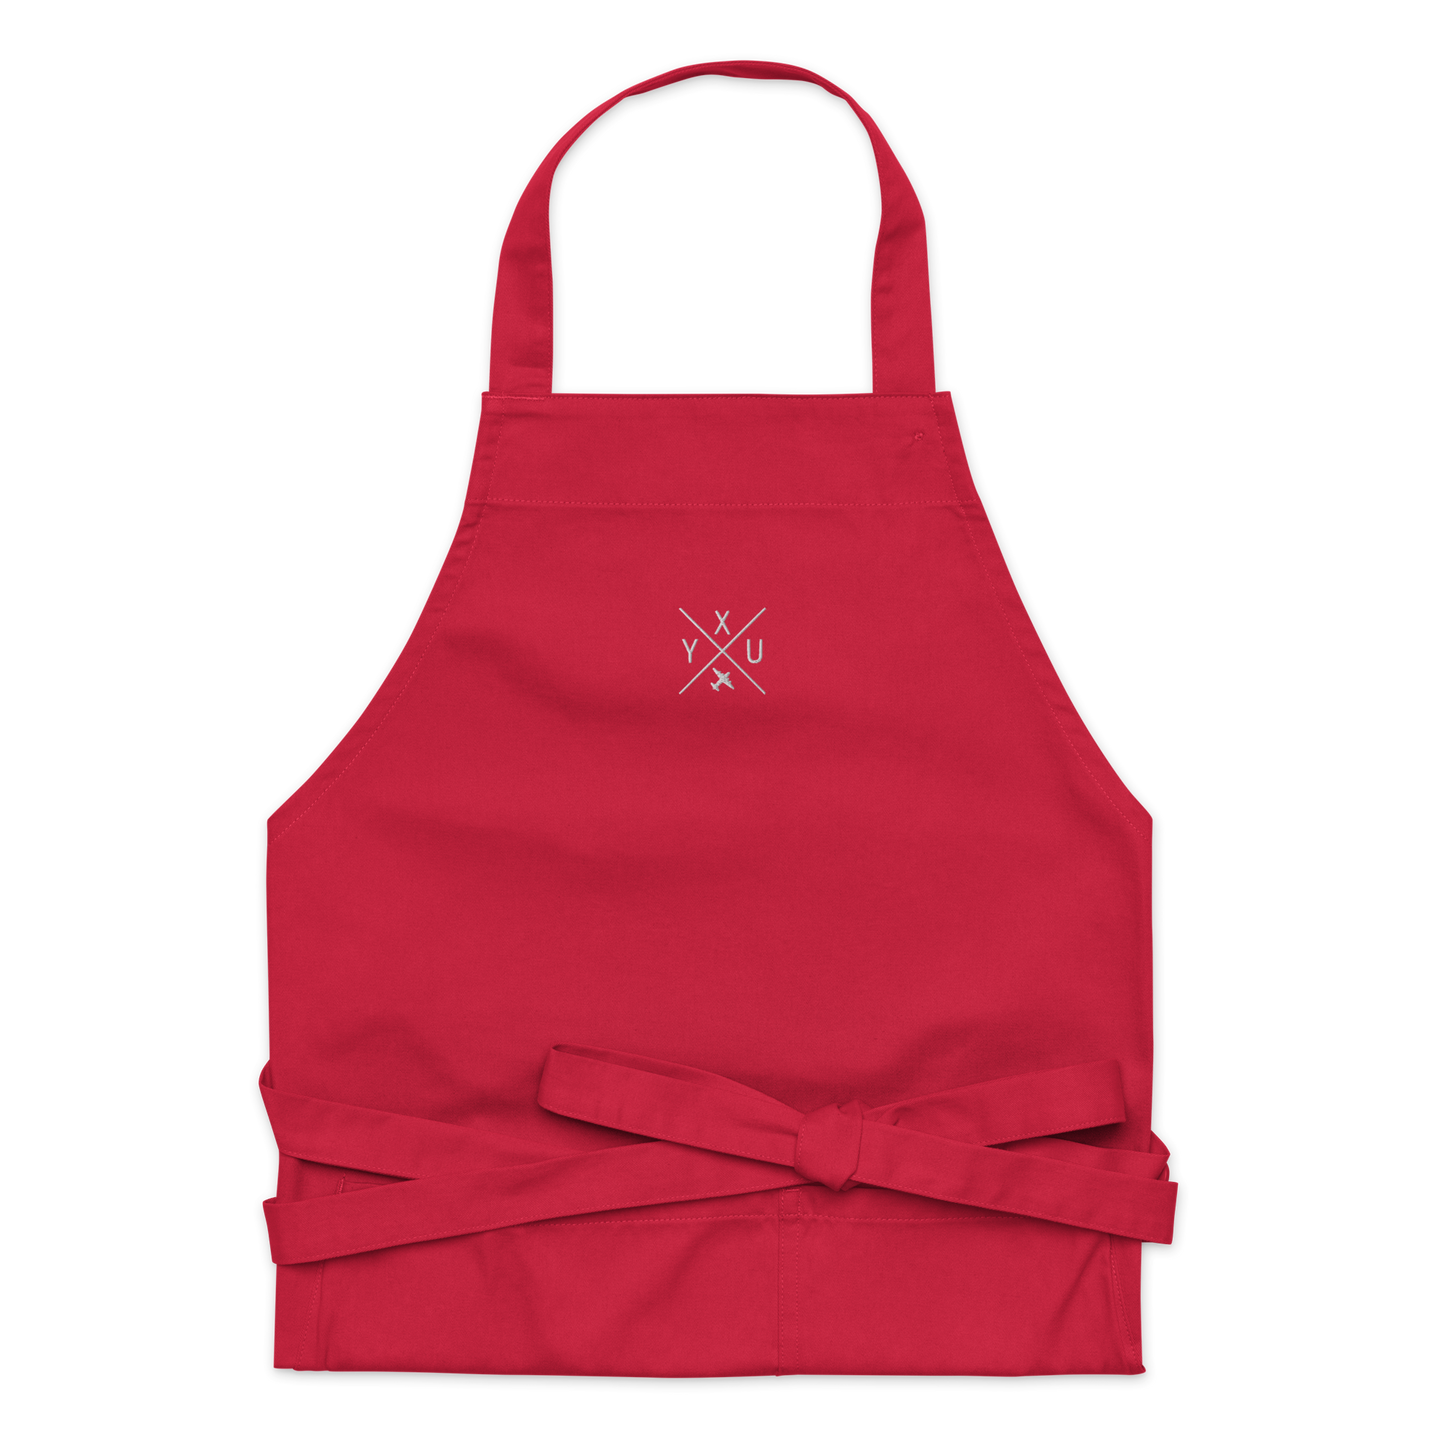 YHM Designs - YXU London Organic Cotton Apron - Crossed-X Design with Airport Code and Vintage Propliner - White Embroidery - Image 05